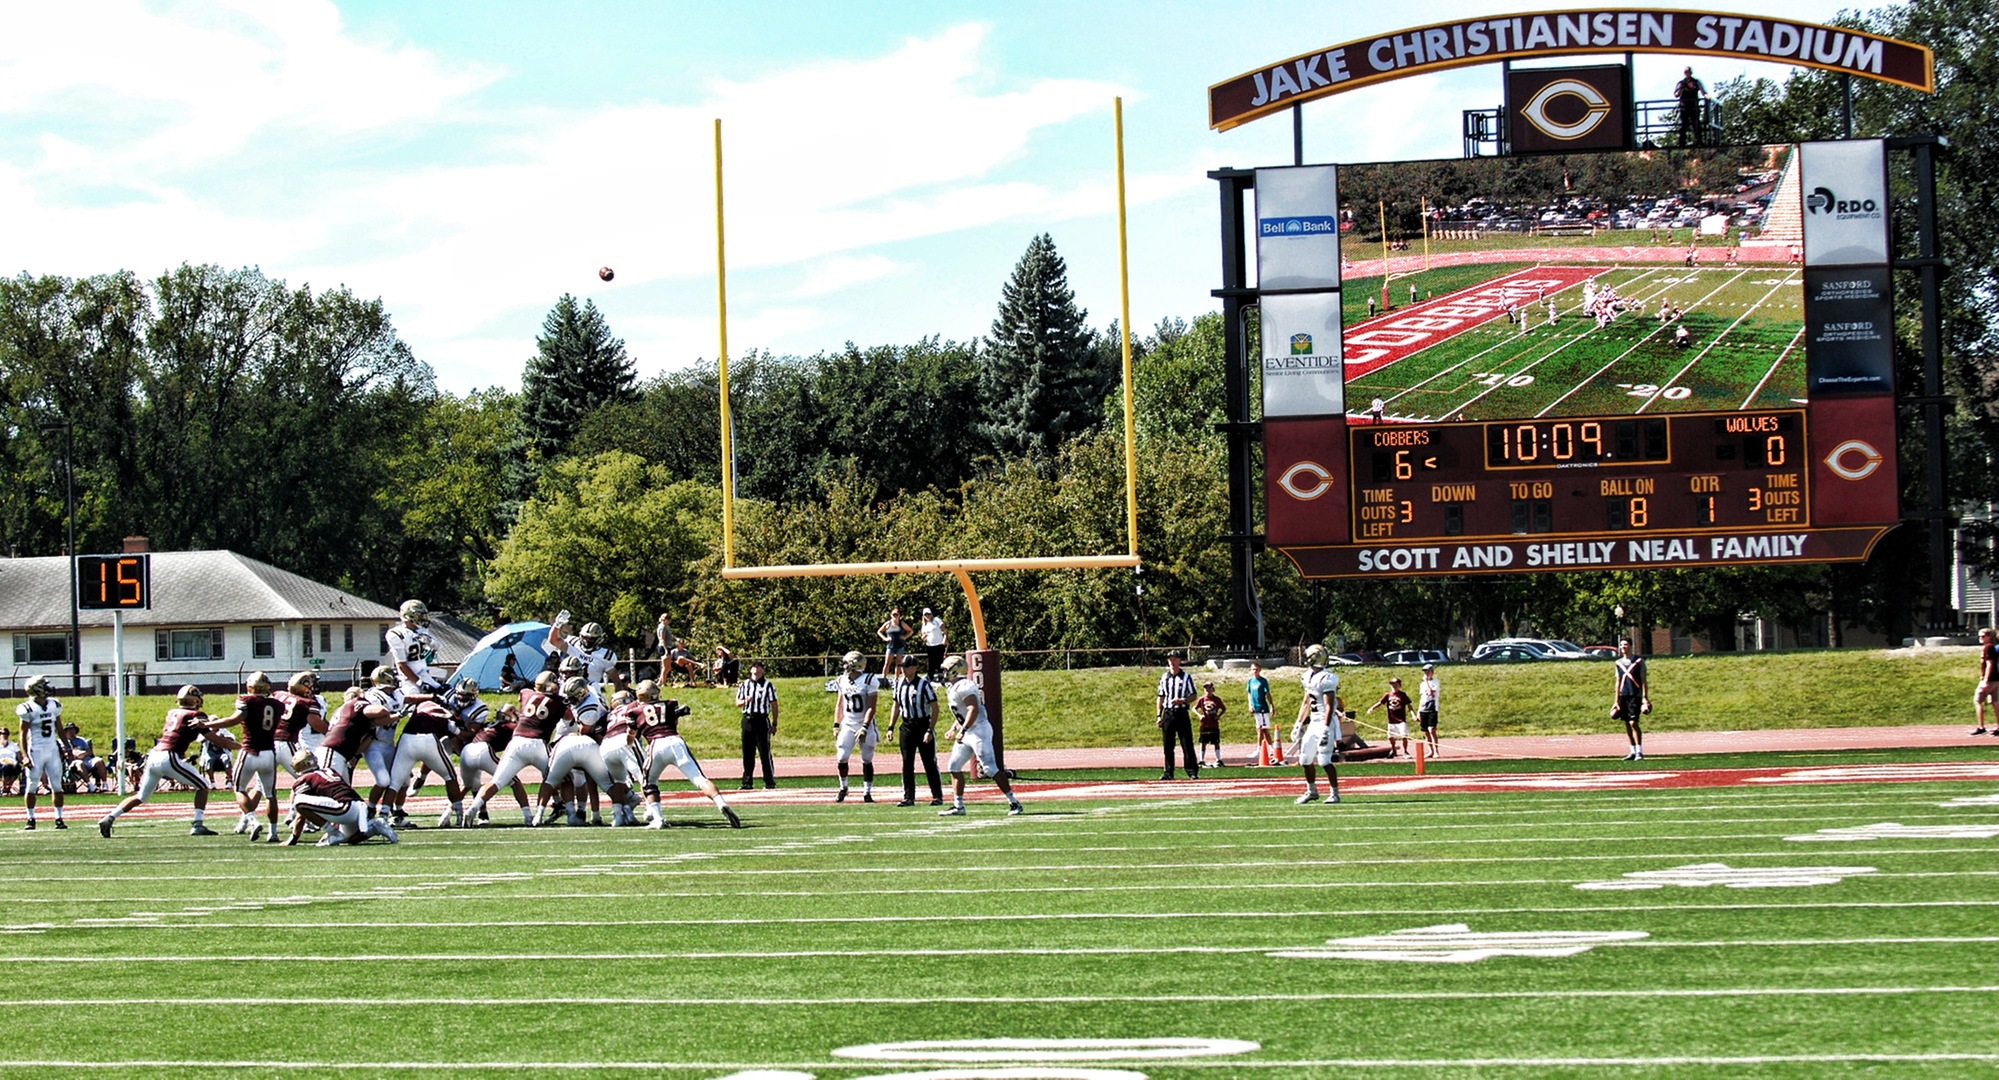 Senior kicker Tony Marzolf connects on an extra point in the Cobbers' season-opening win over Neb. Wesleyan which was the debut of the brand new $1 million scoreboard.